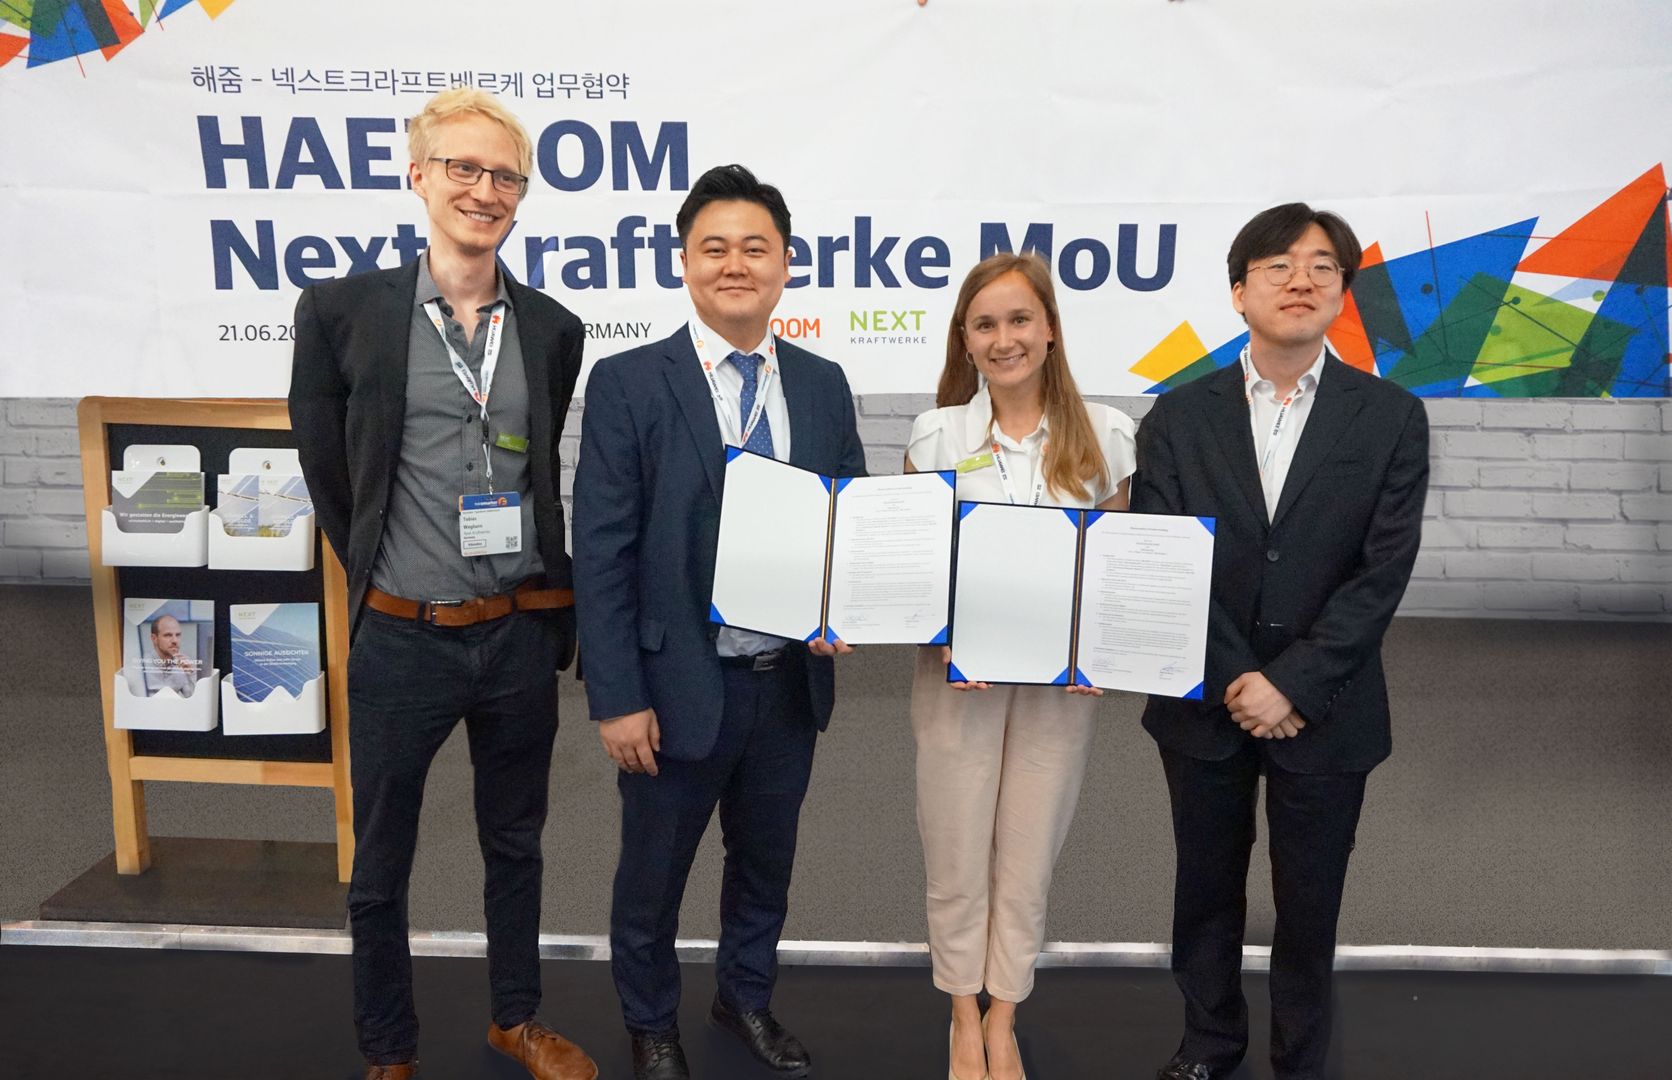 At InterSolar 2018, Next Kraftwerke and Haezoom Inc. signed a memorandum of understanding to jointly develop a VPP solution for the Korean Domestic Market. 